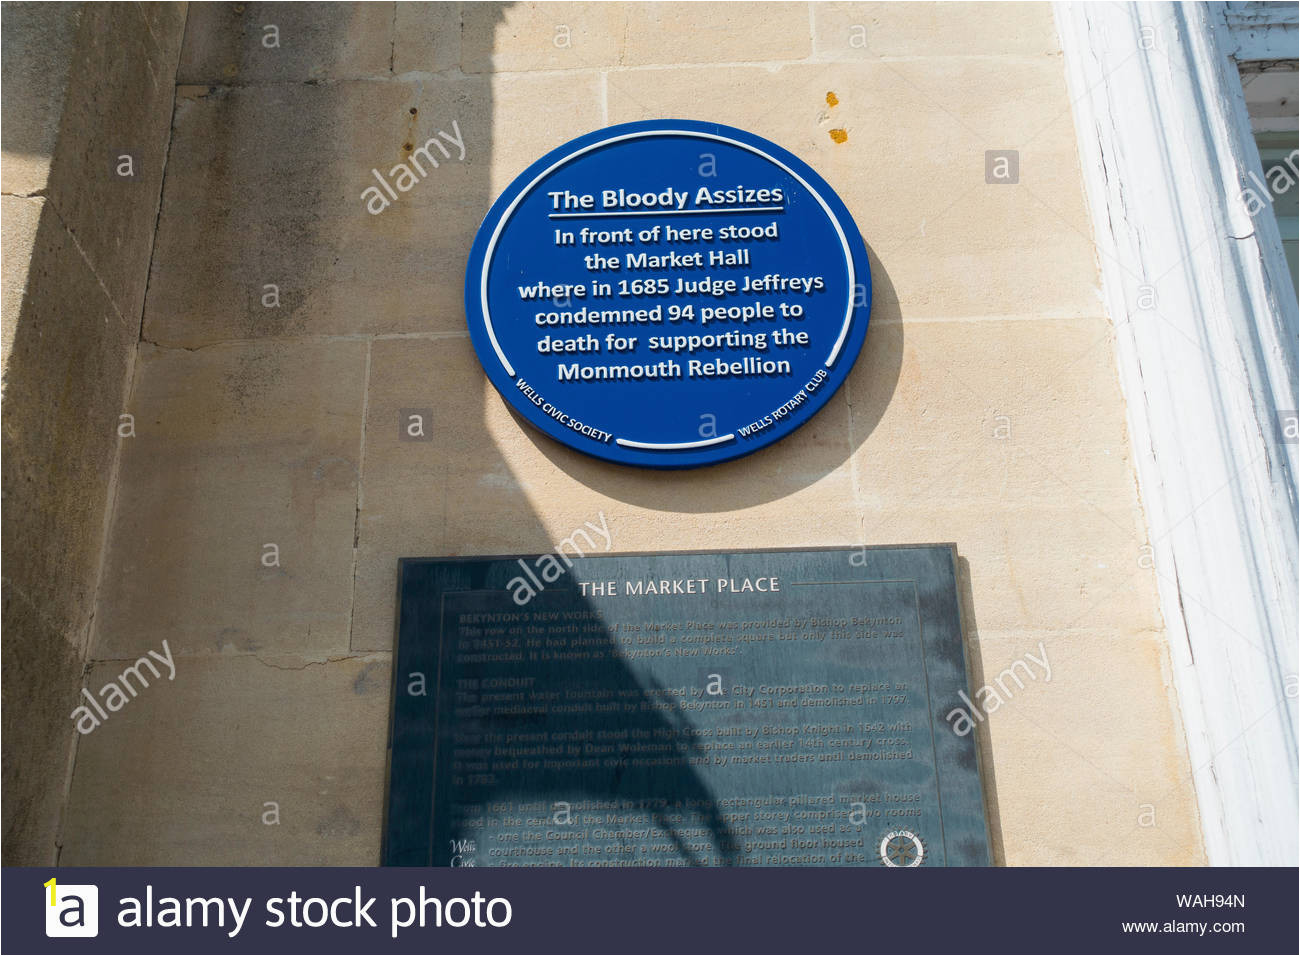 blue plaque memorating the bloody assizes of judge jeffreys wells town centrewells somerset england uk WAH94N